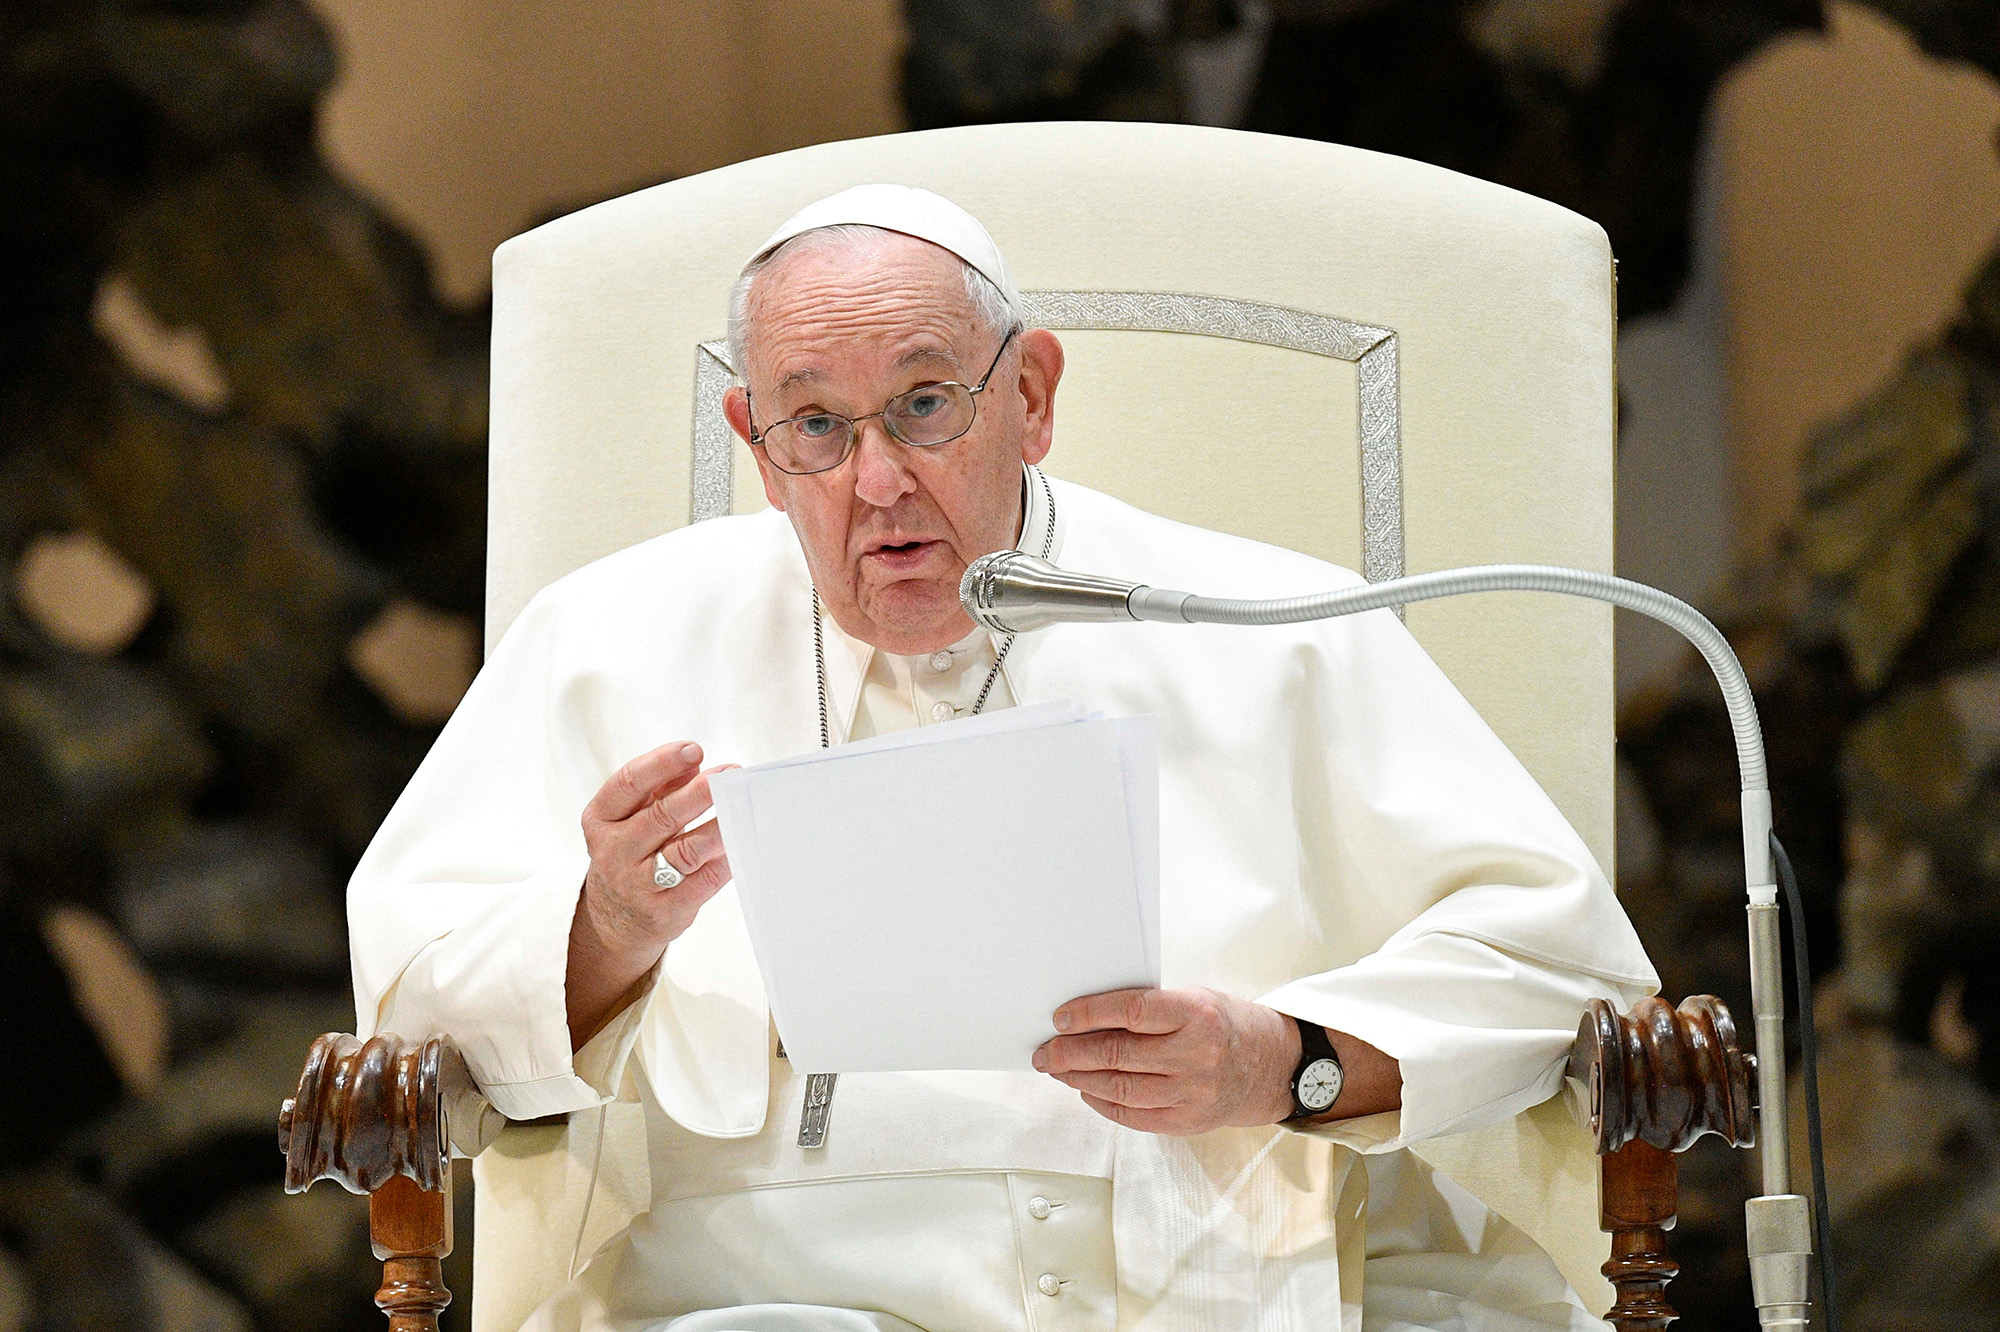 Pope Francis speaks during the weekly general audience at the Vatican, on February 22.